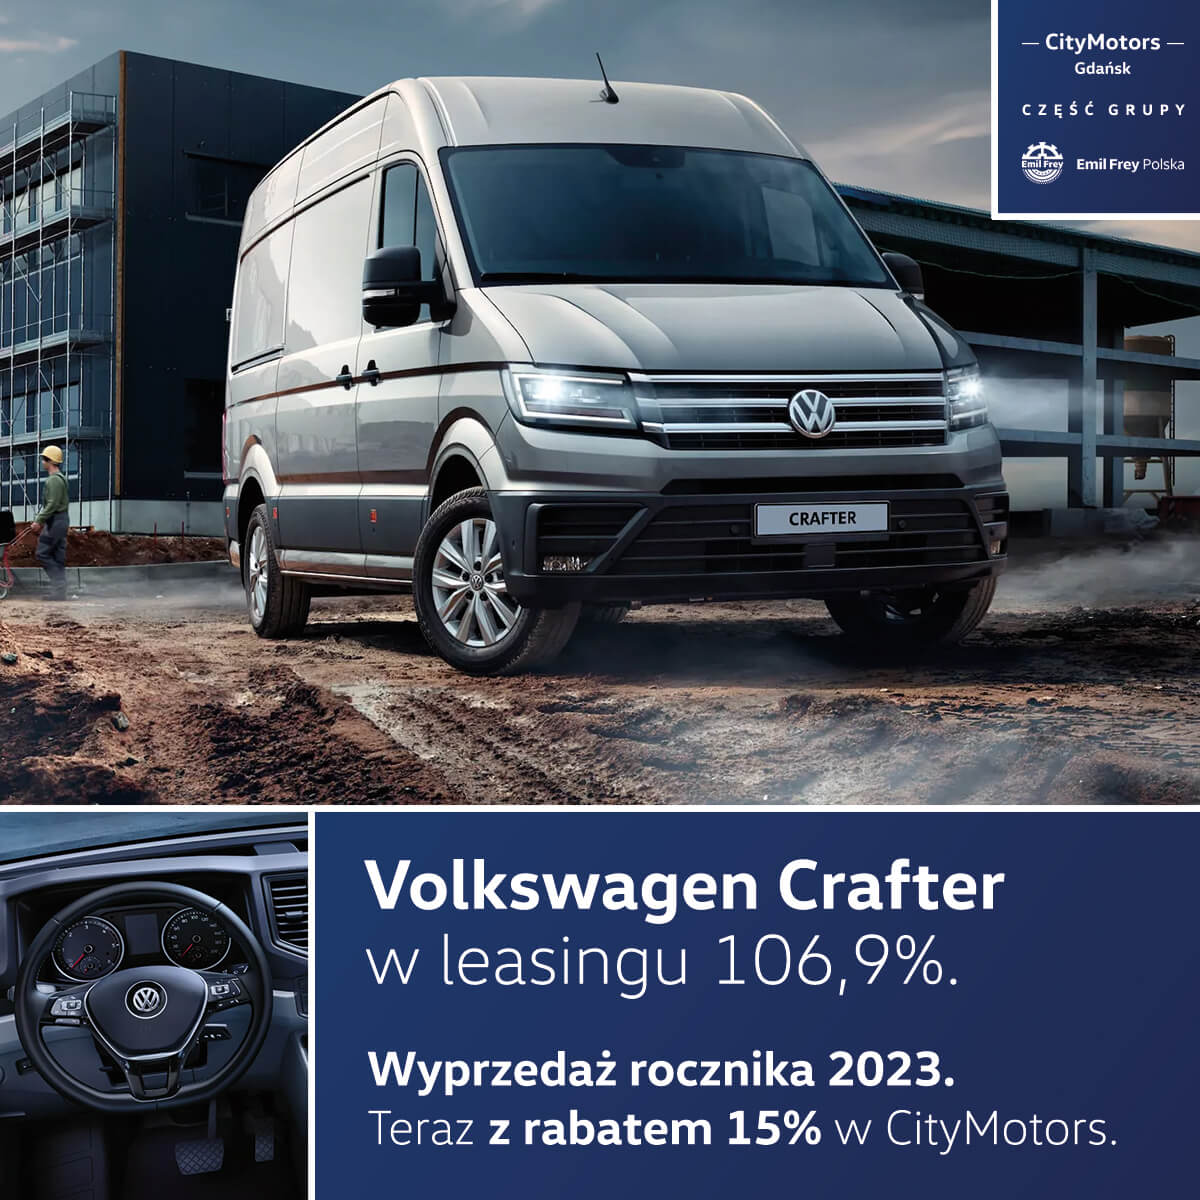 Crafter - leasing 106.9%